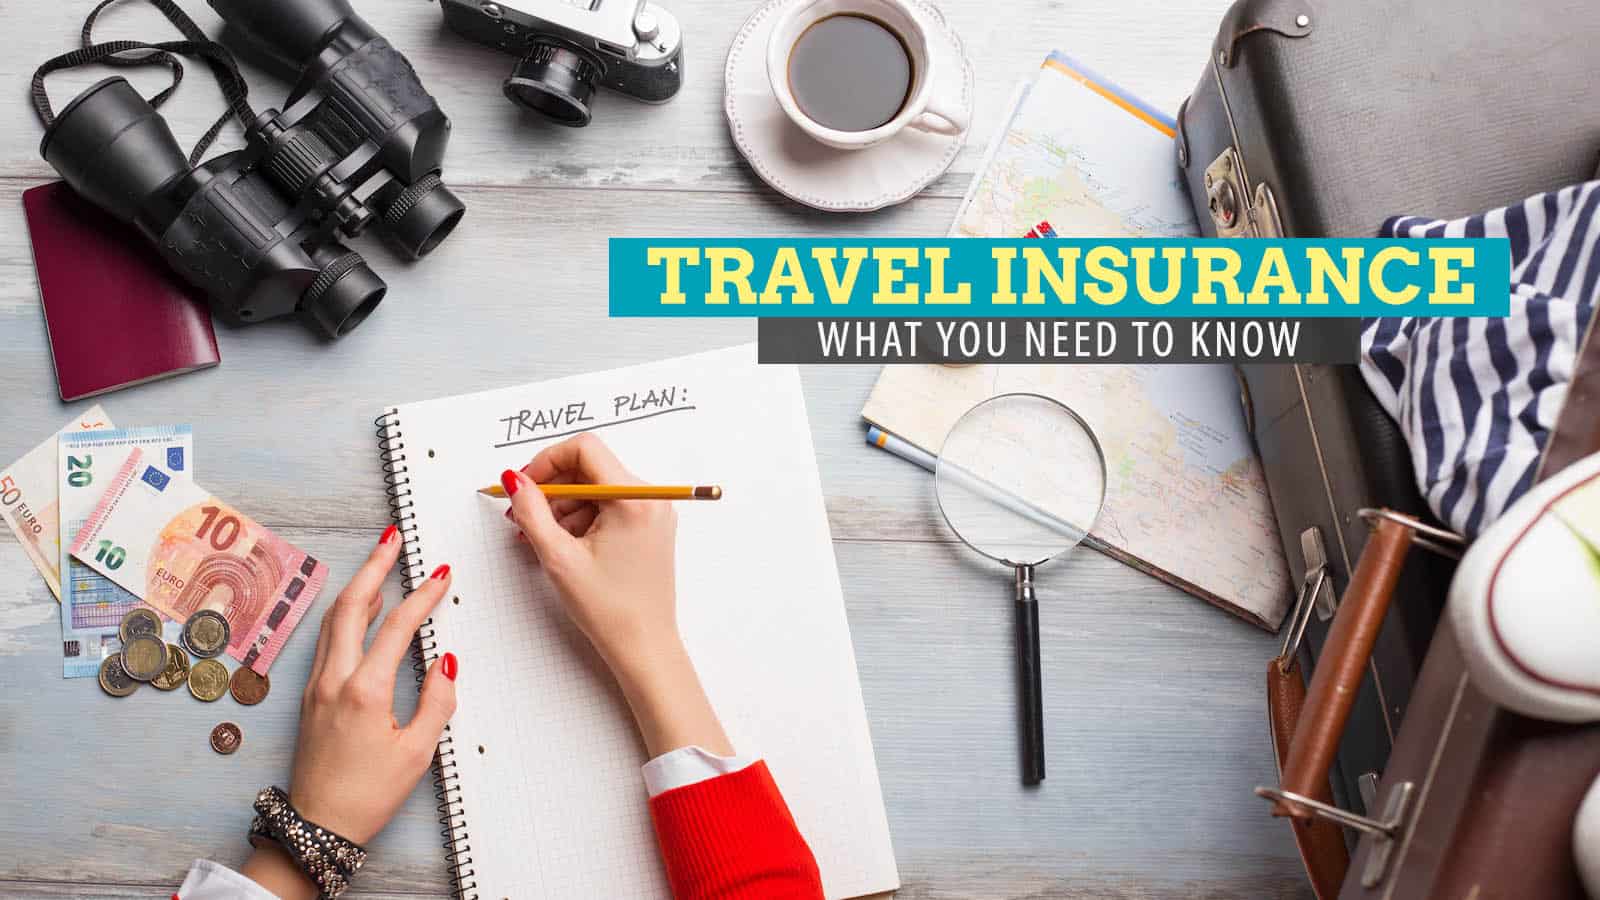 Travel Insurance: What You Need to Know